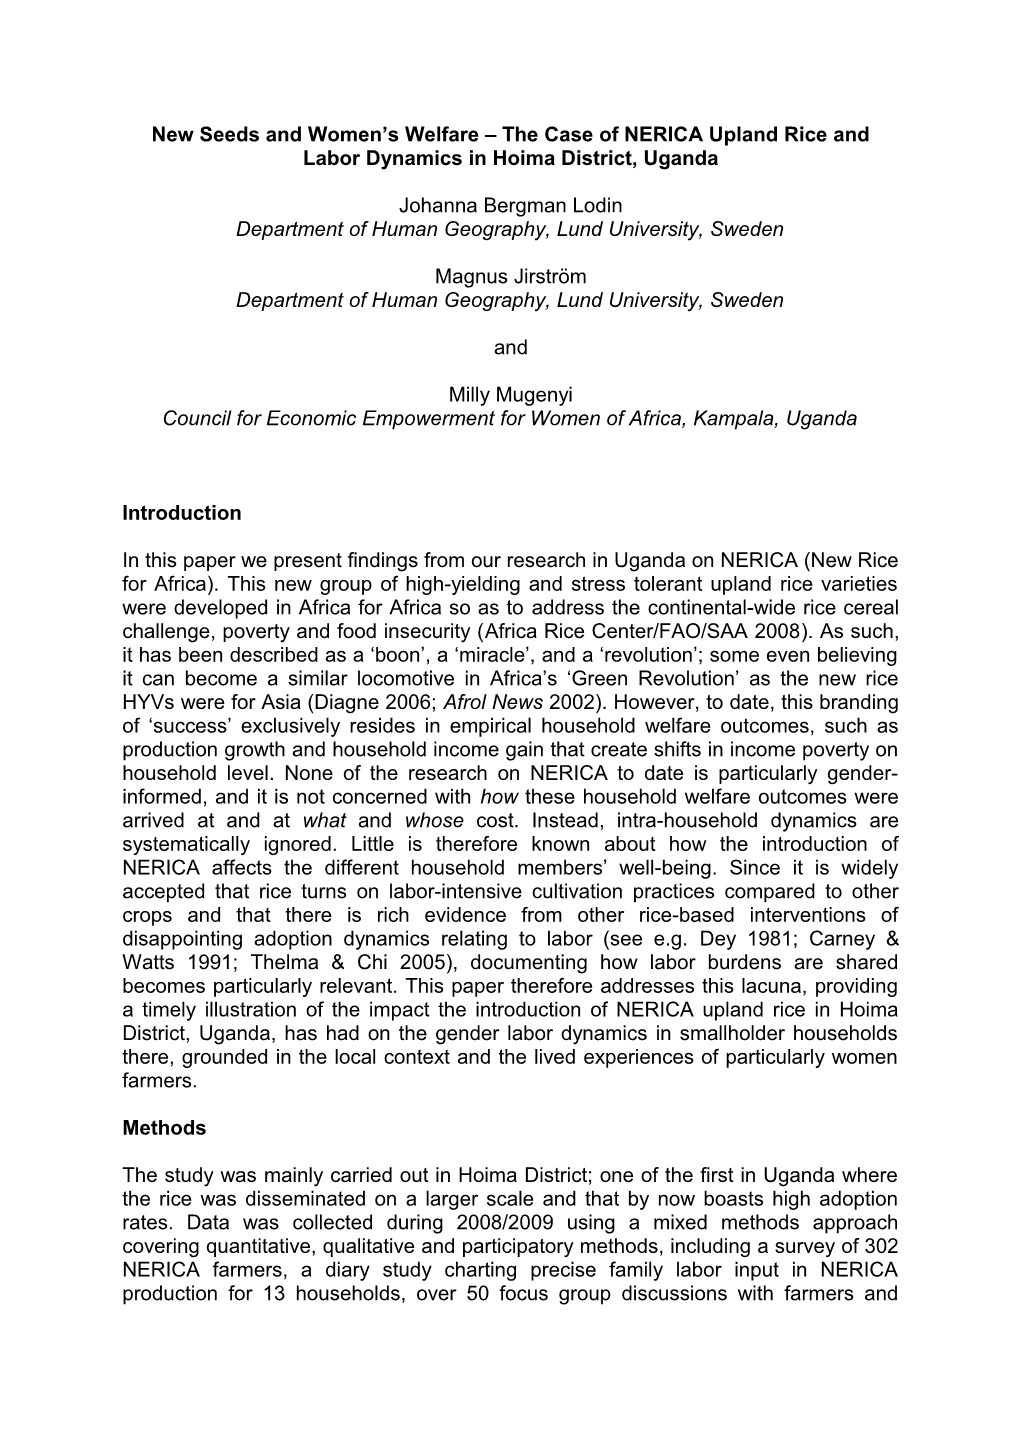 New Seeds and Women S Welfare the Case of NERICA Upland Rice and Labor Dynamics in Hoima